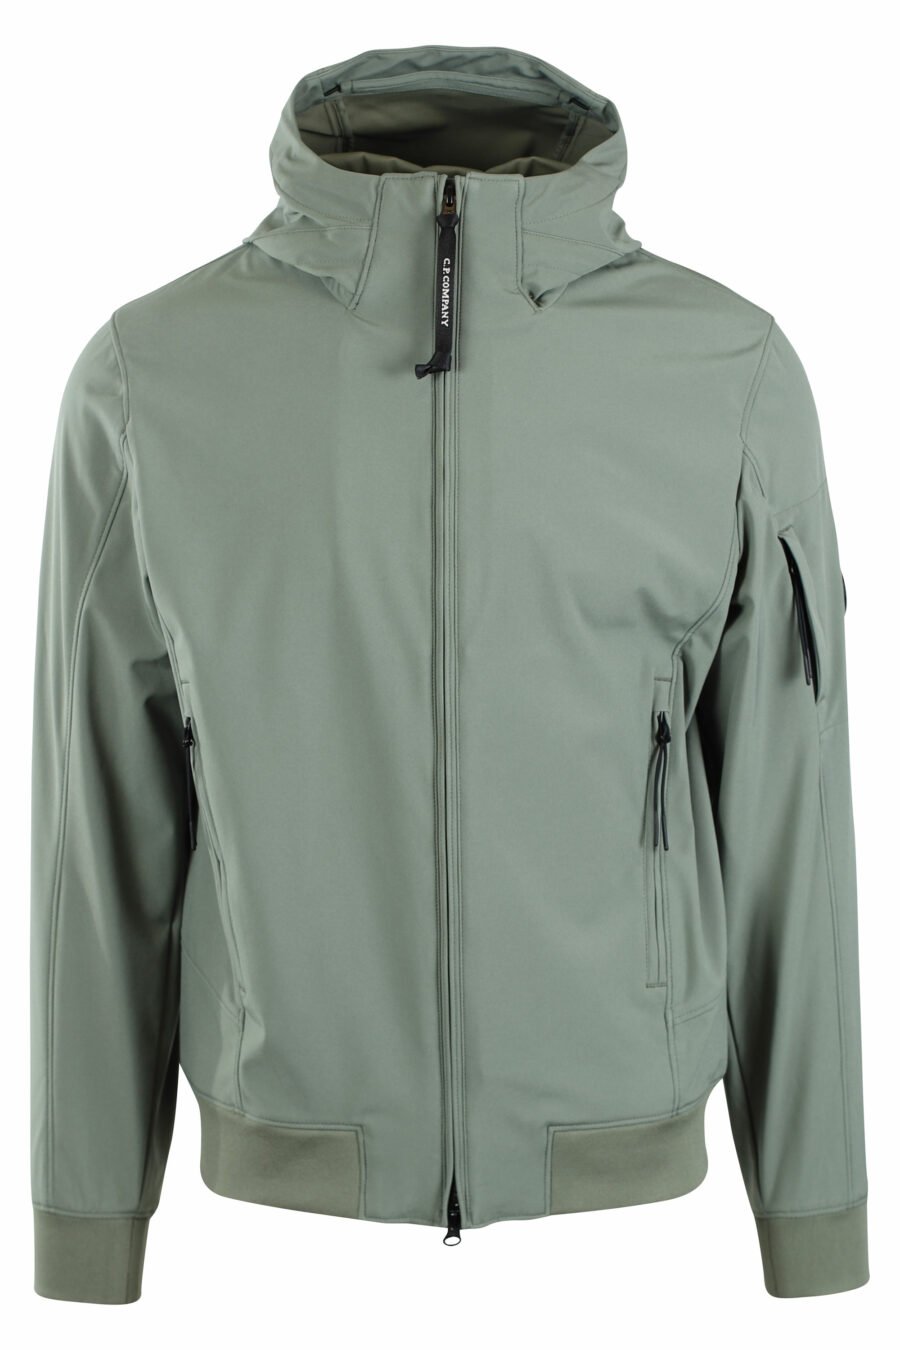 Military green jacket with hood and side pocket with circular mini-logo - IMG 2684